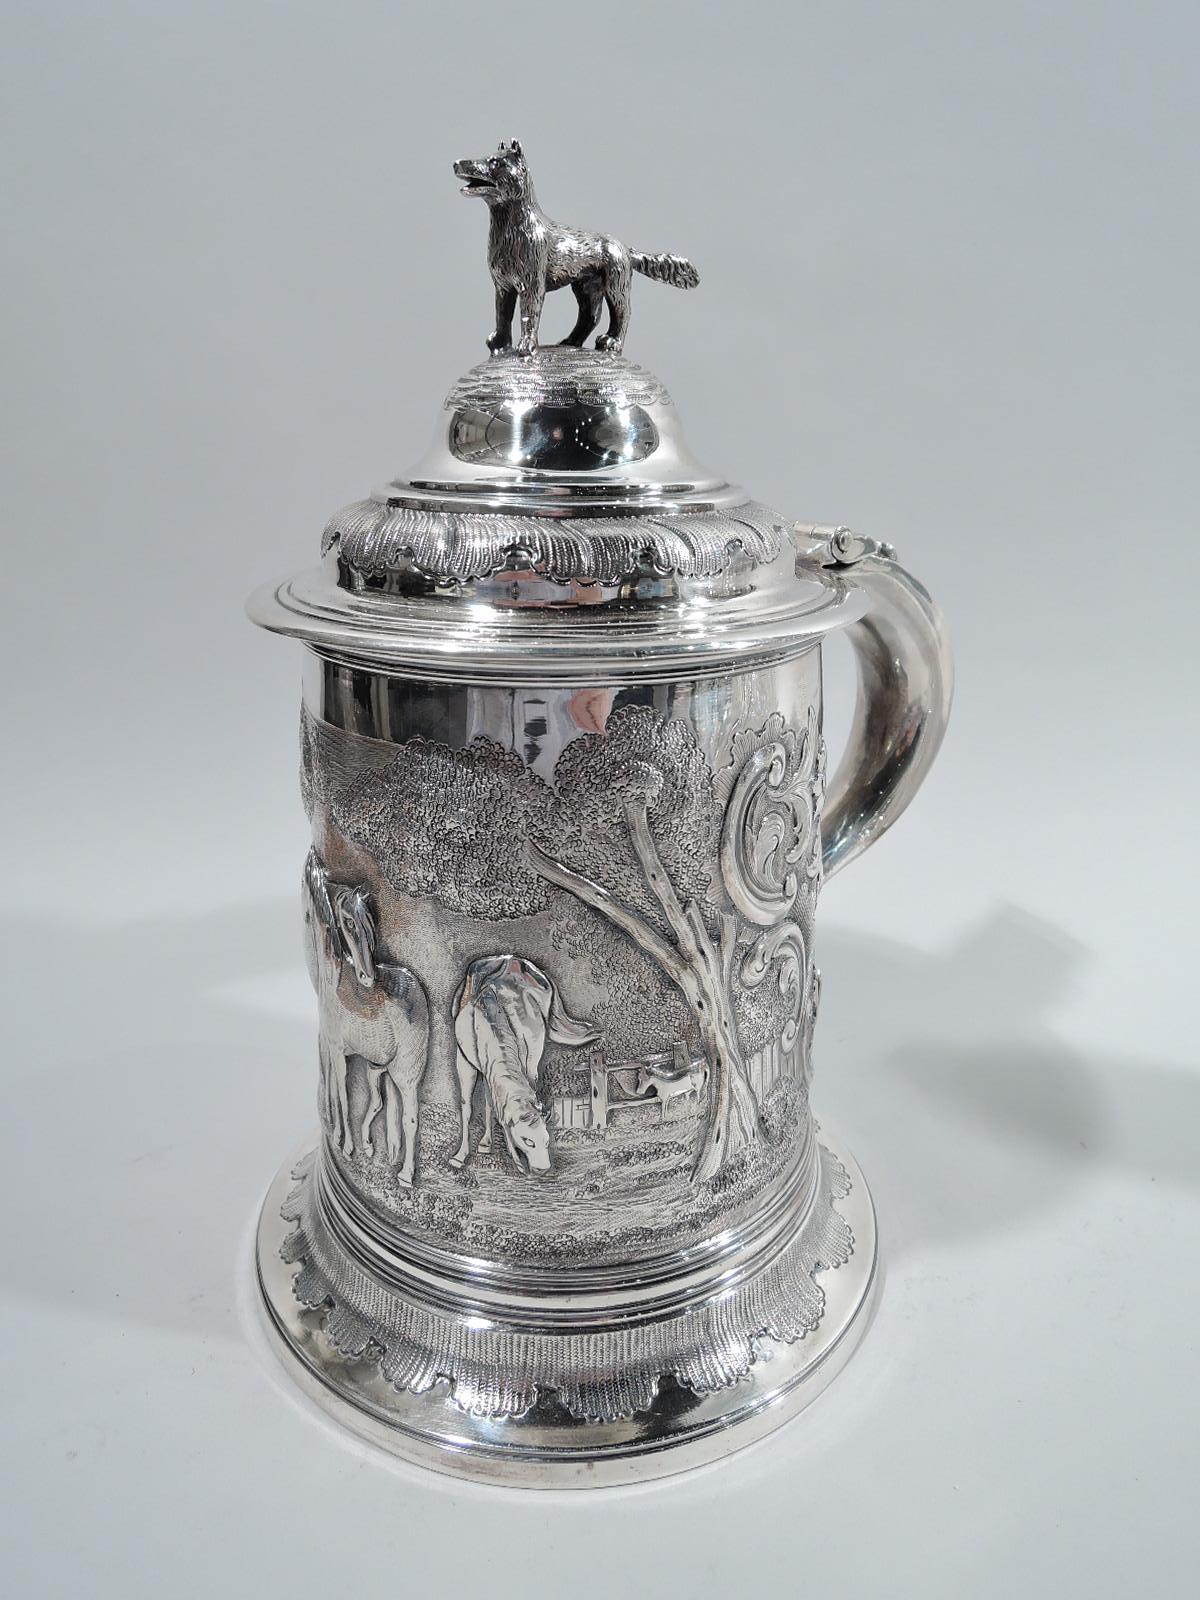 William IV sterling silver tankard. Made by William Chawner in London in 1834. Drum-form with spread foot, strap-hinged and double-domed cover, and s-scroll handle. Chased, engraved, and embossed frieze depicting horses grazing in bosky paddock.